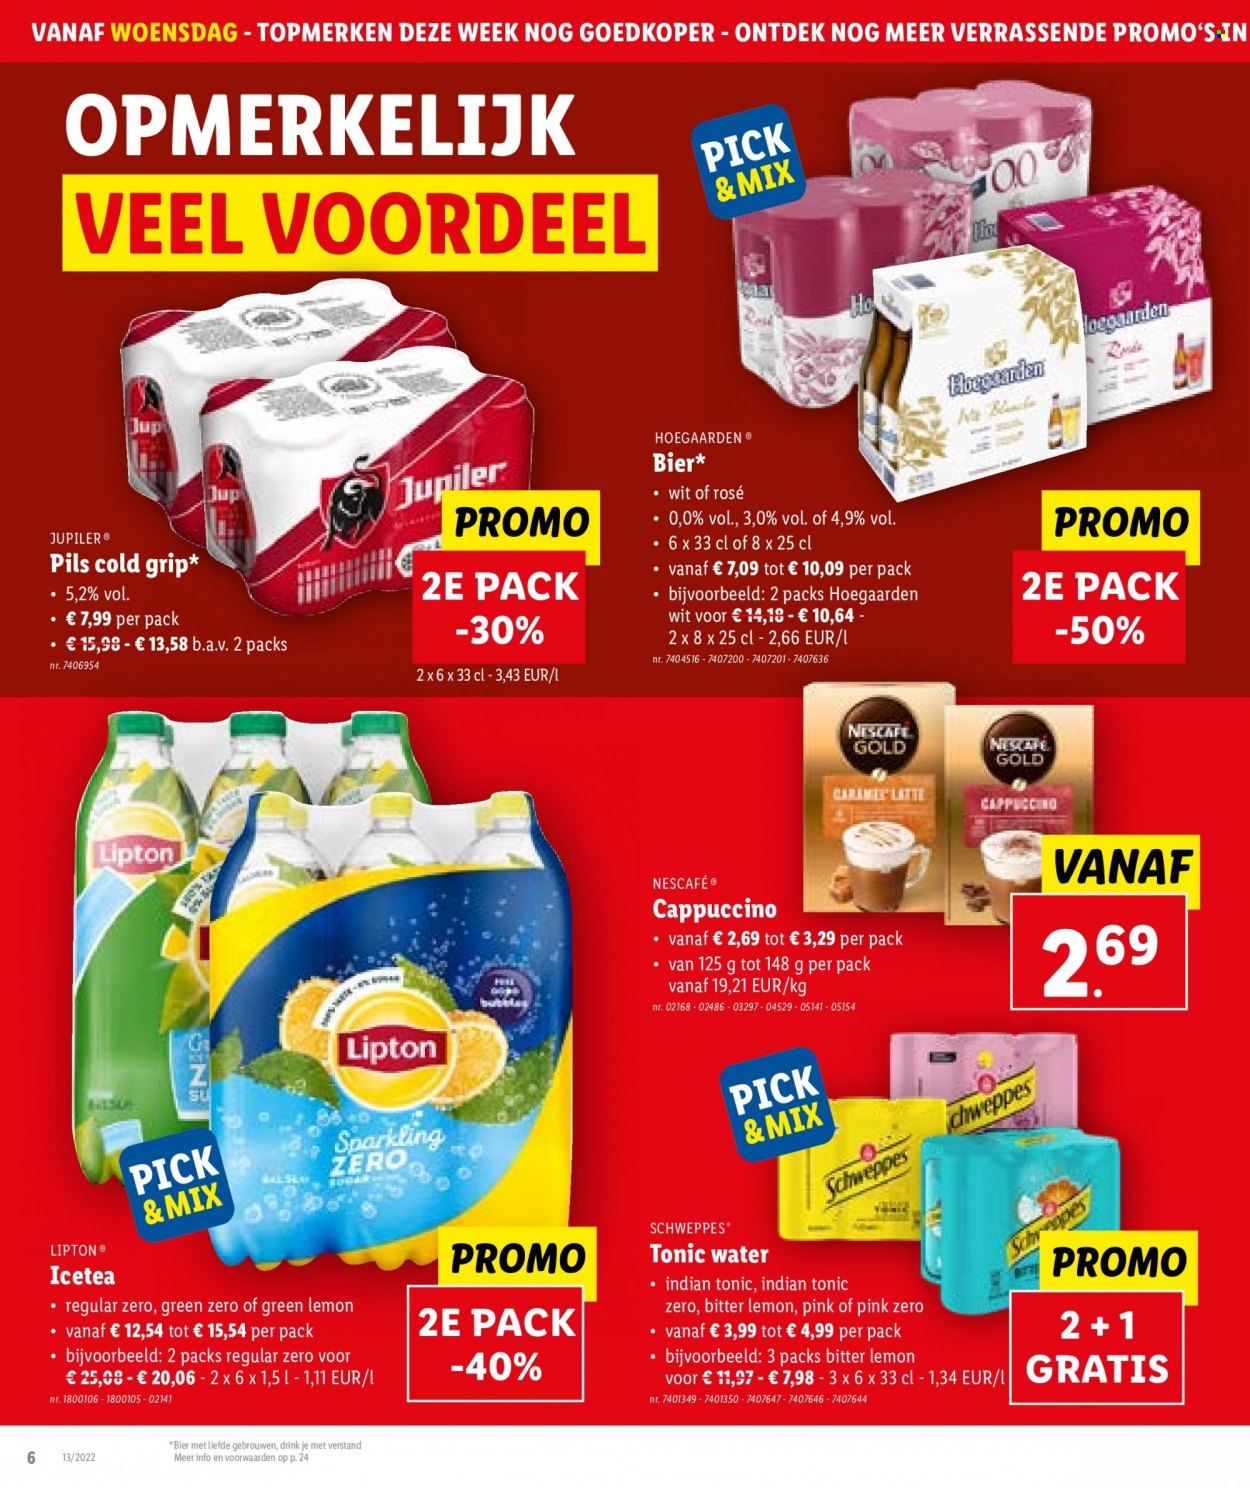 Catalogue Lidl - 29.3.2023 - 4.4.2023. Page 6.